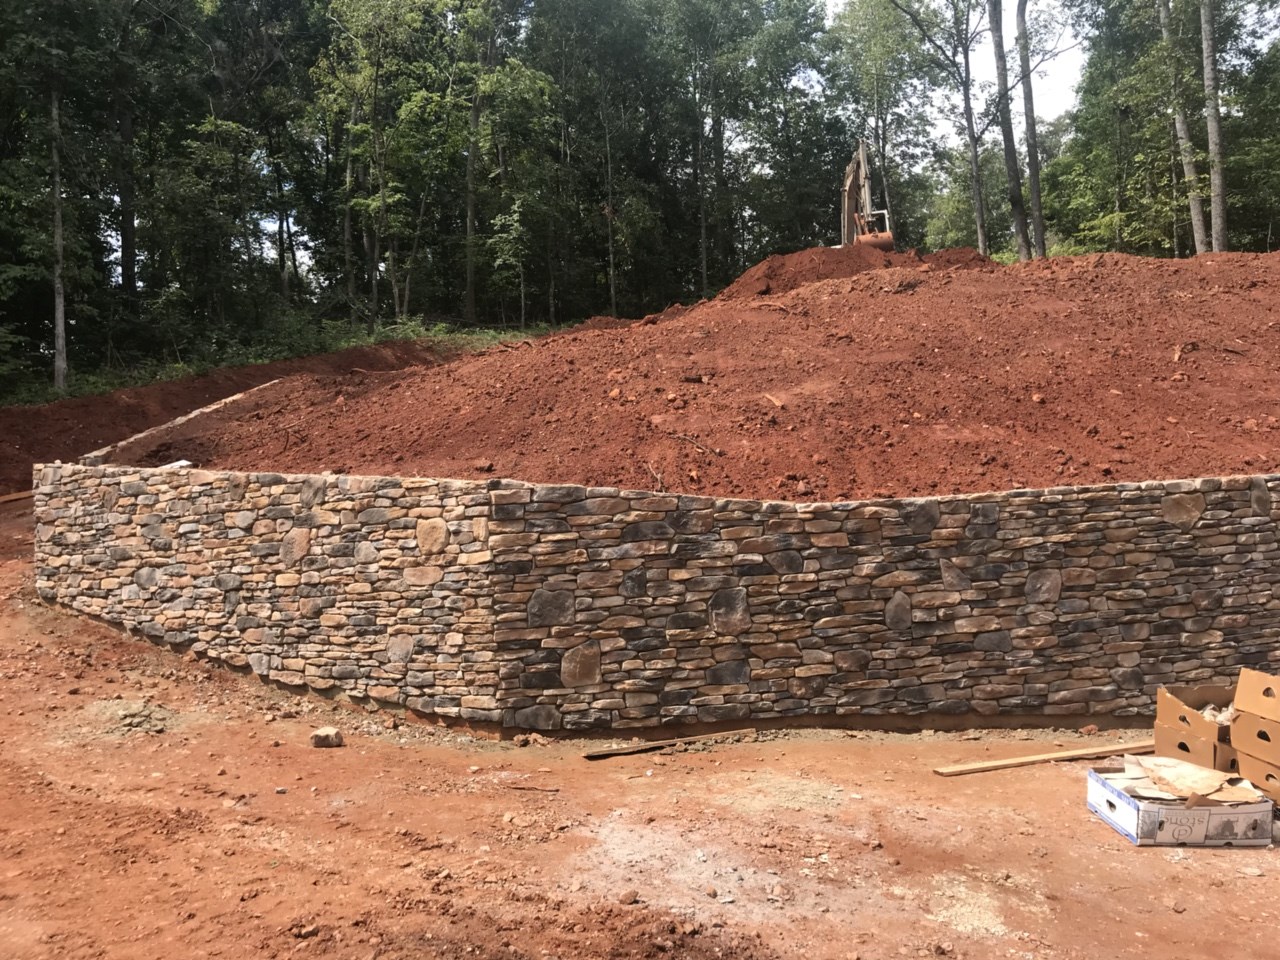 5-retaining walls with stone